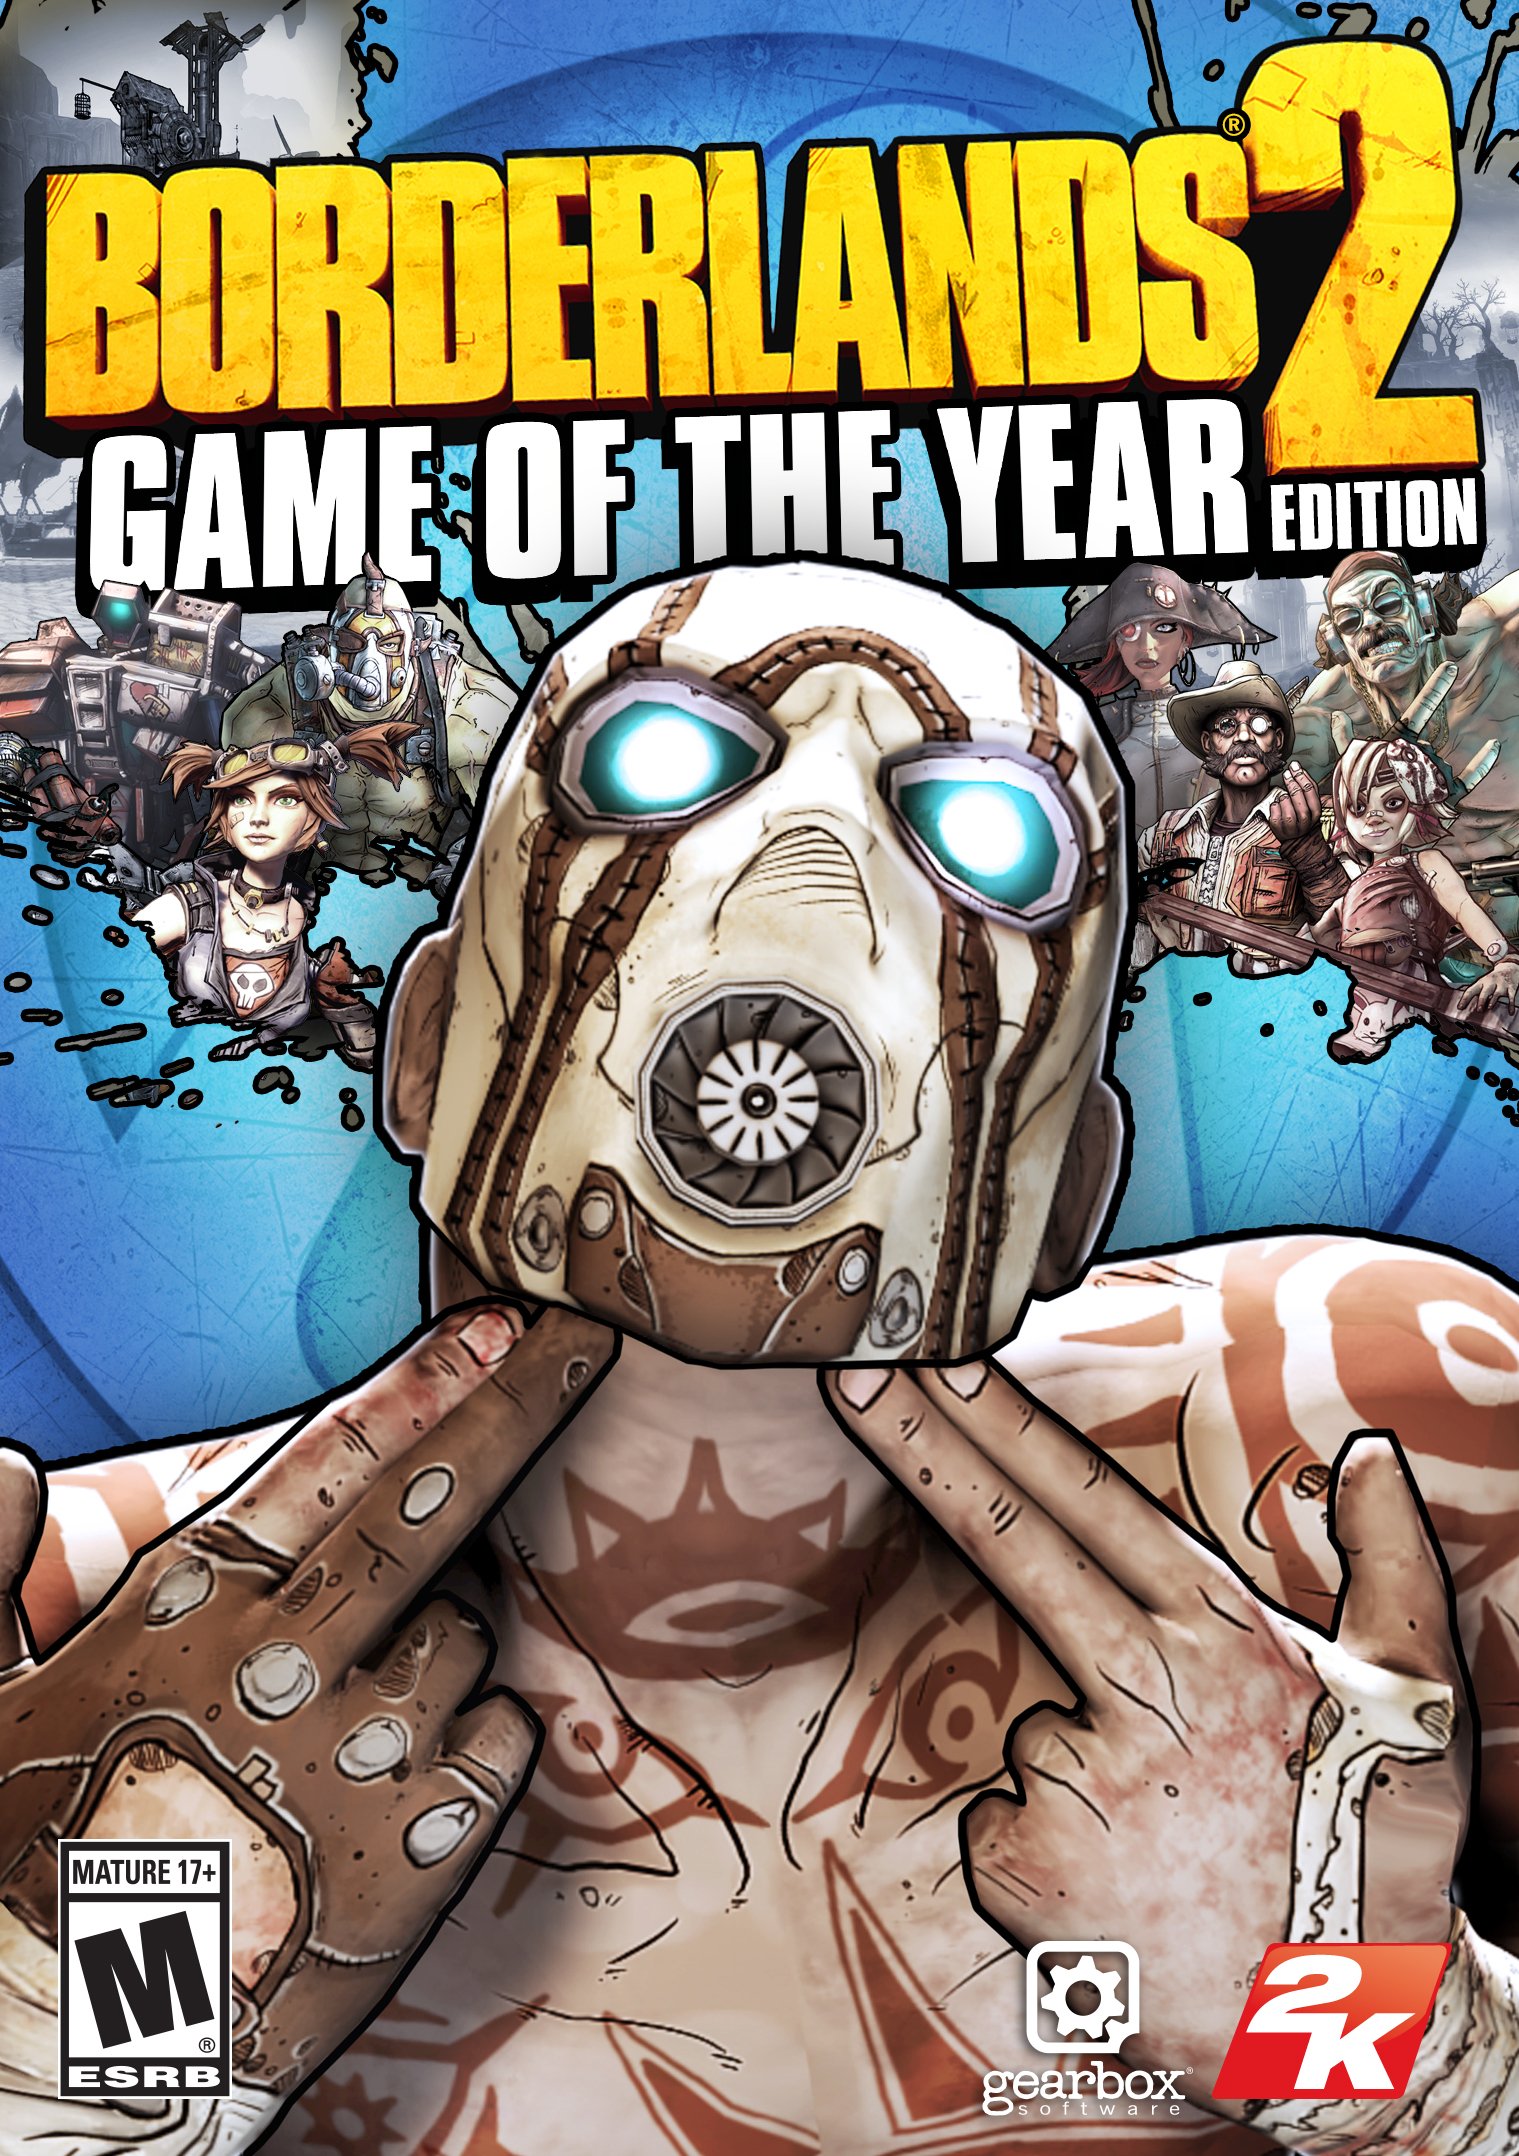 Borderlands 2 Game of the Year - Steam PC [Online Game Code]